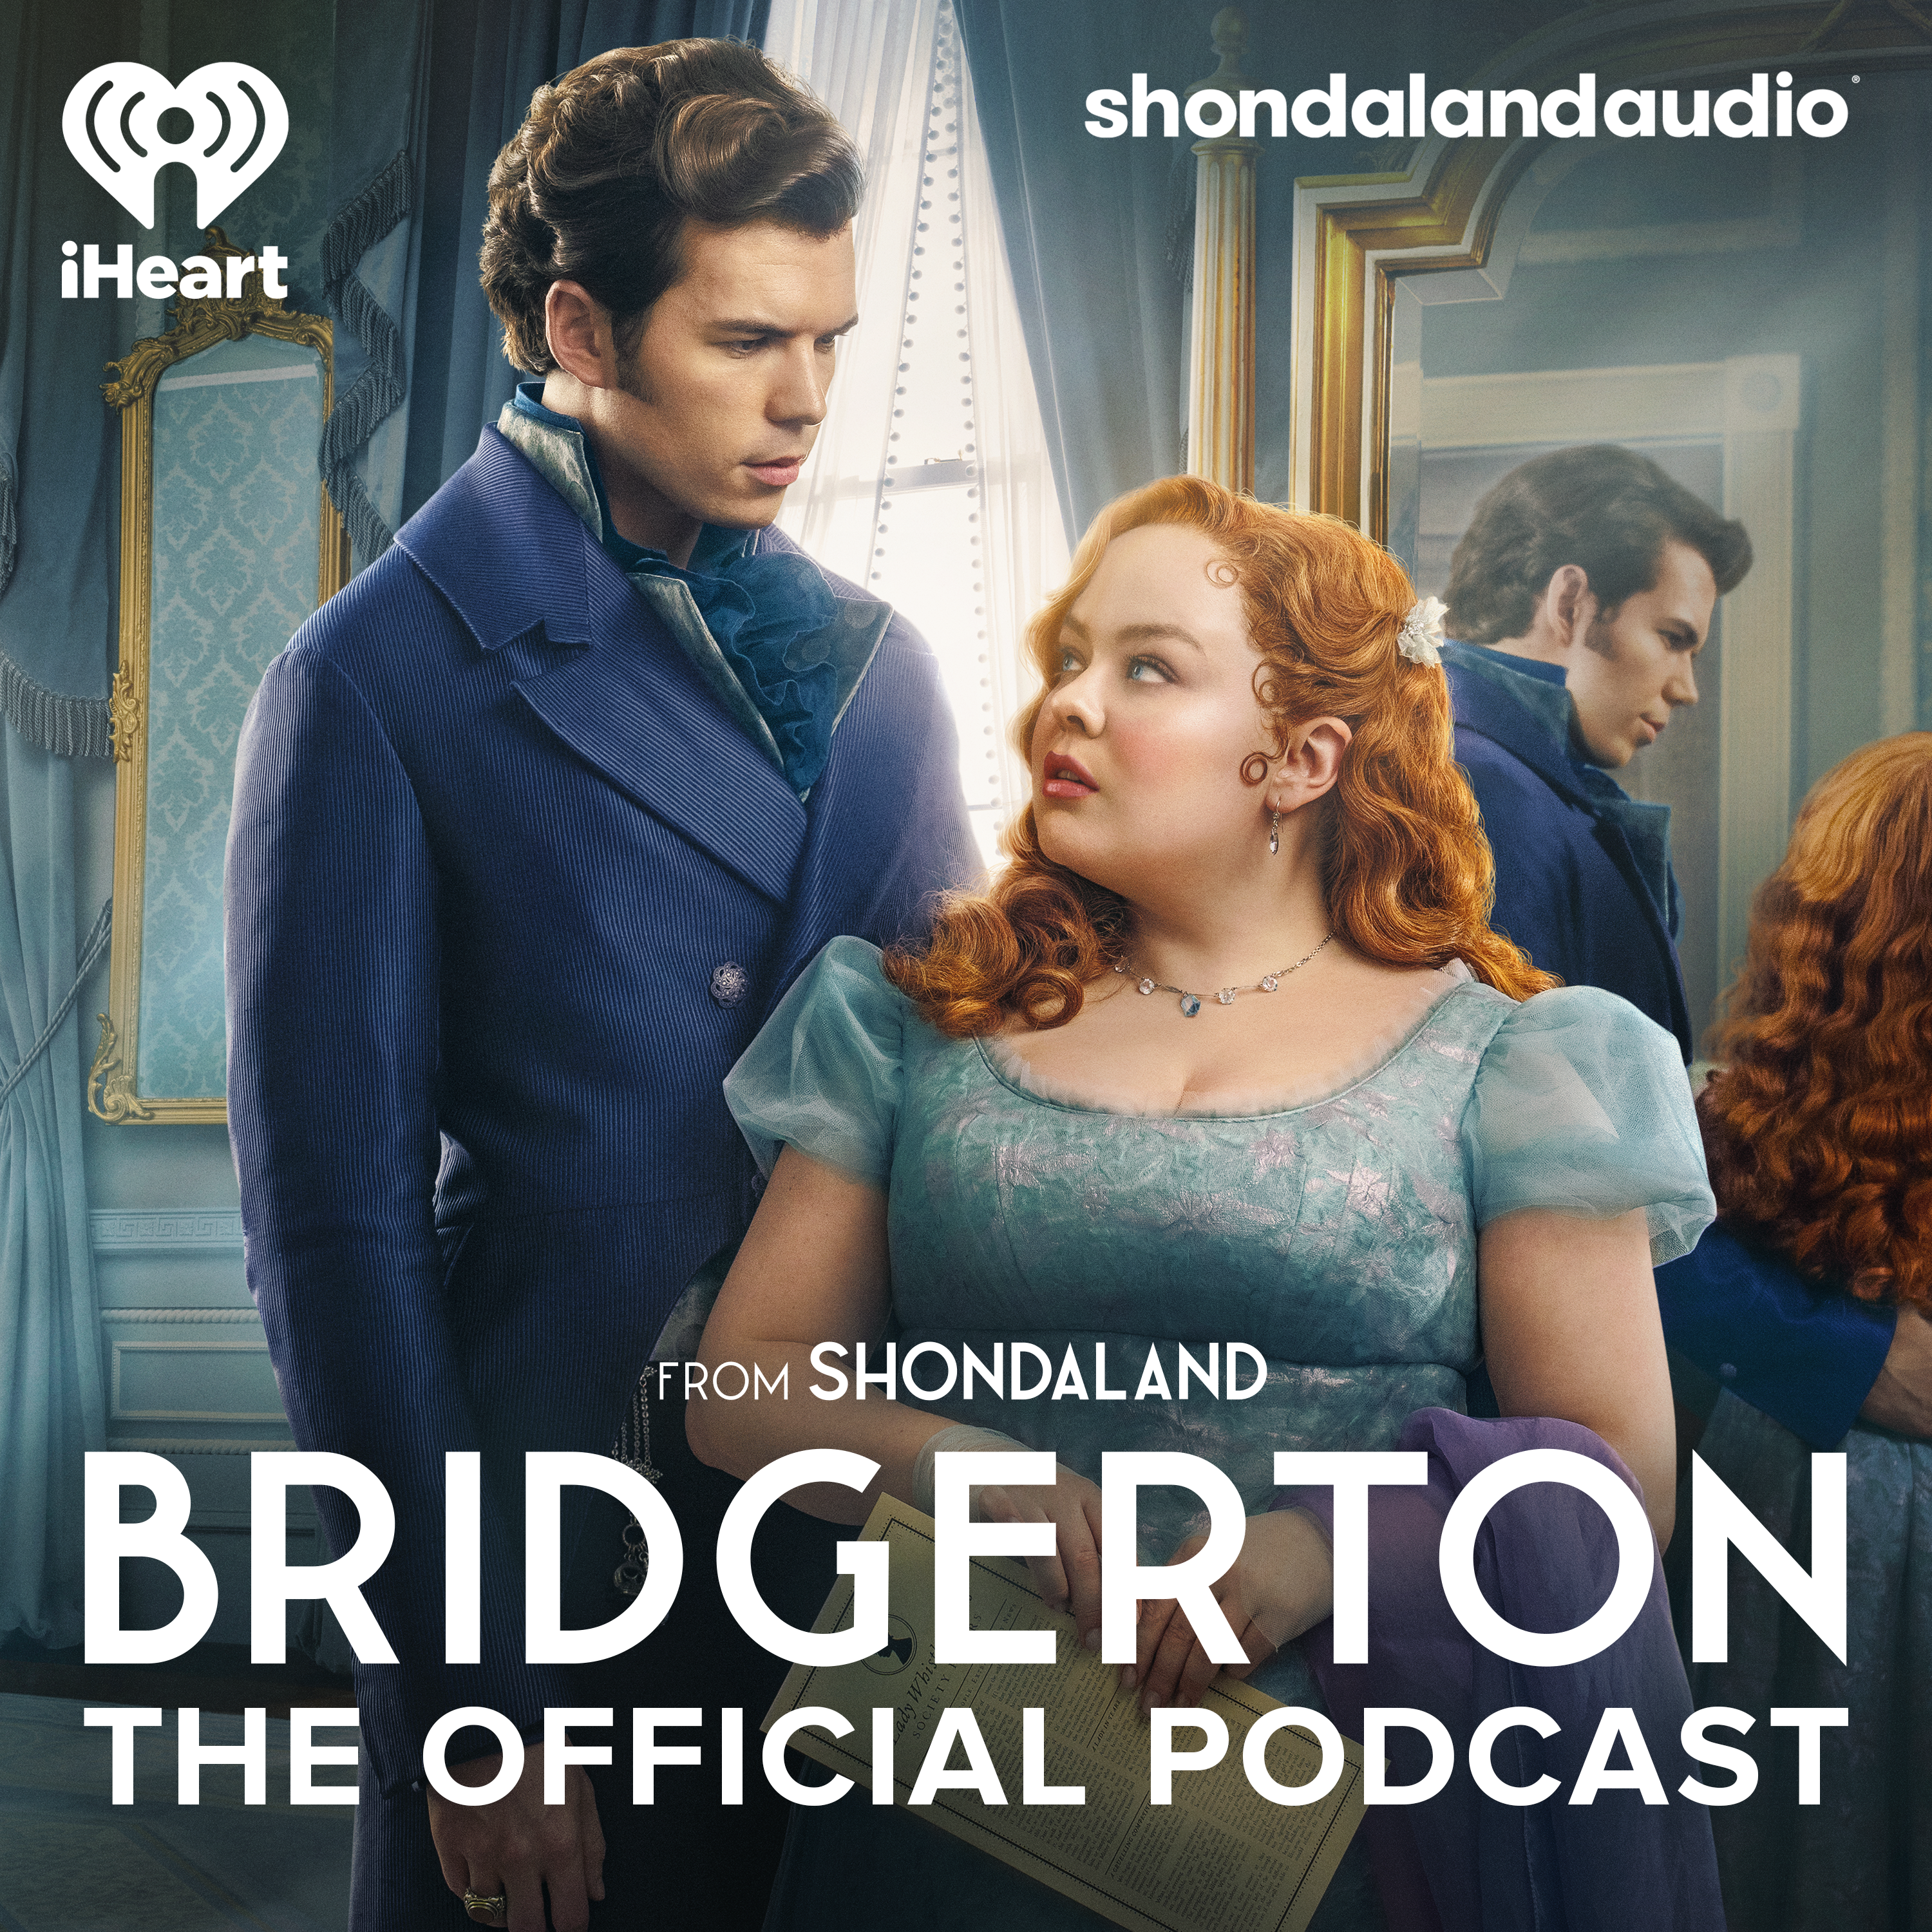 Bridgerton: The Official Podcast Returns on May 2nd!